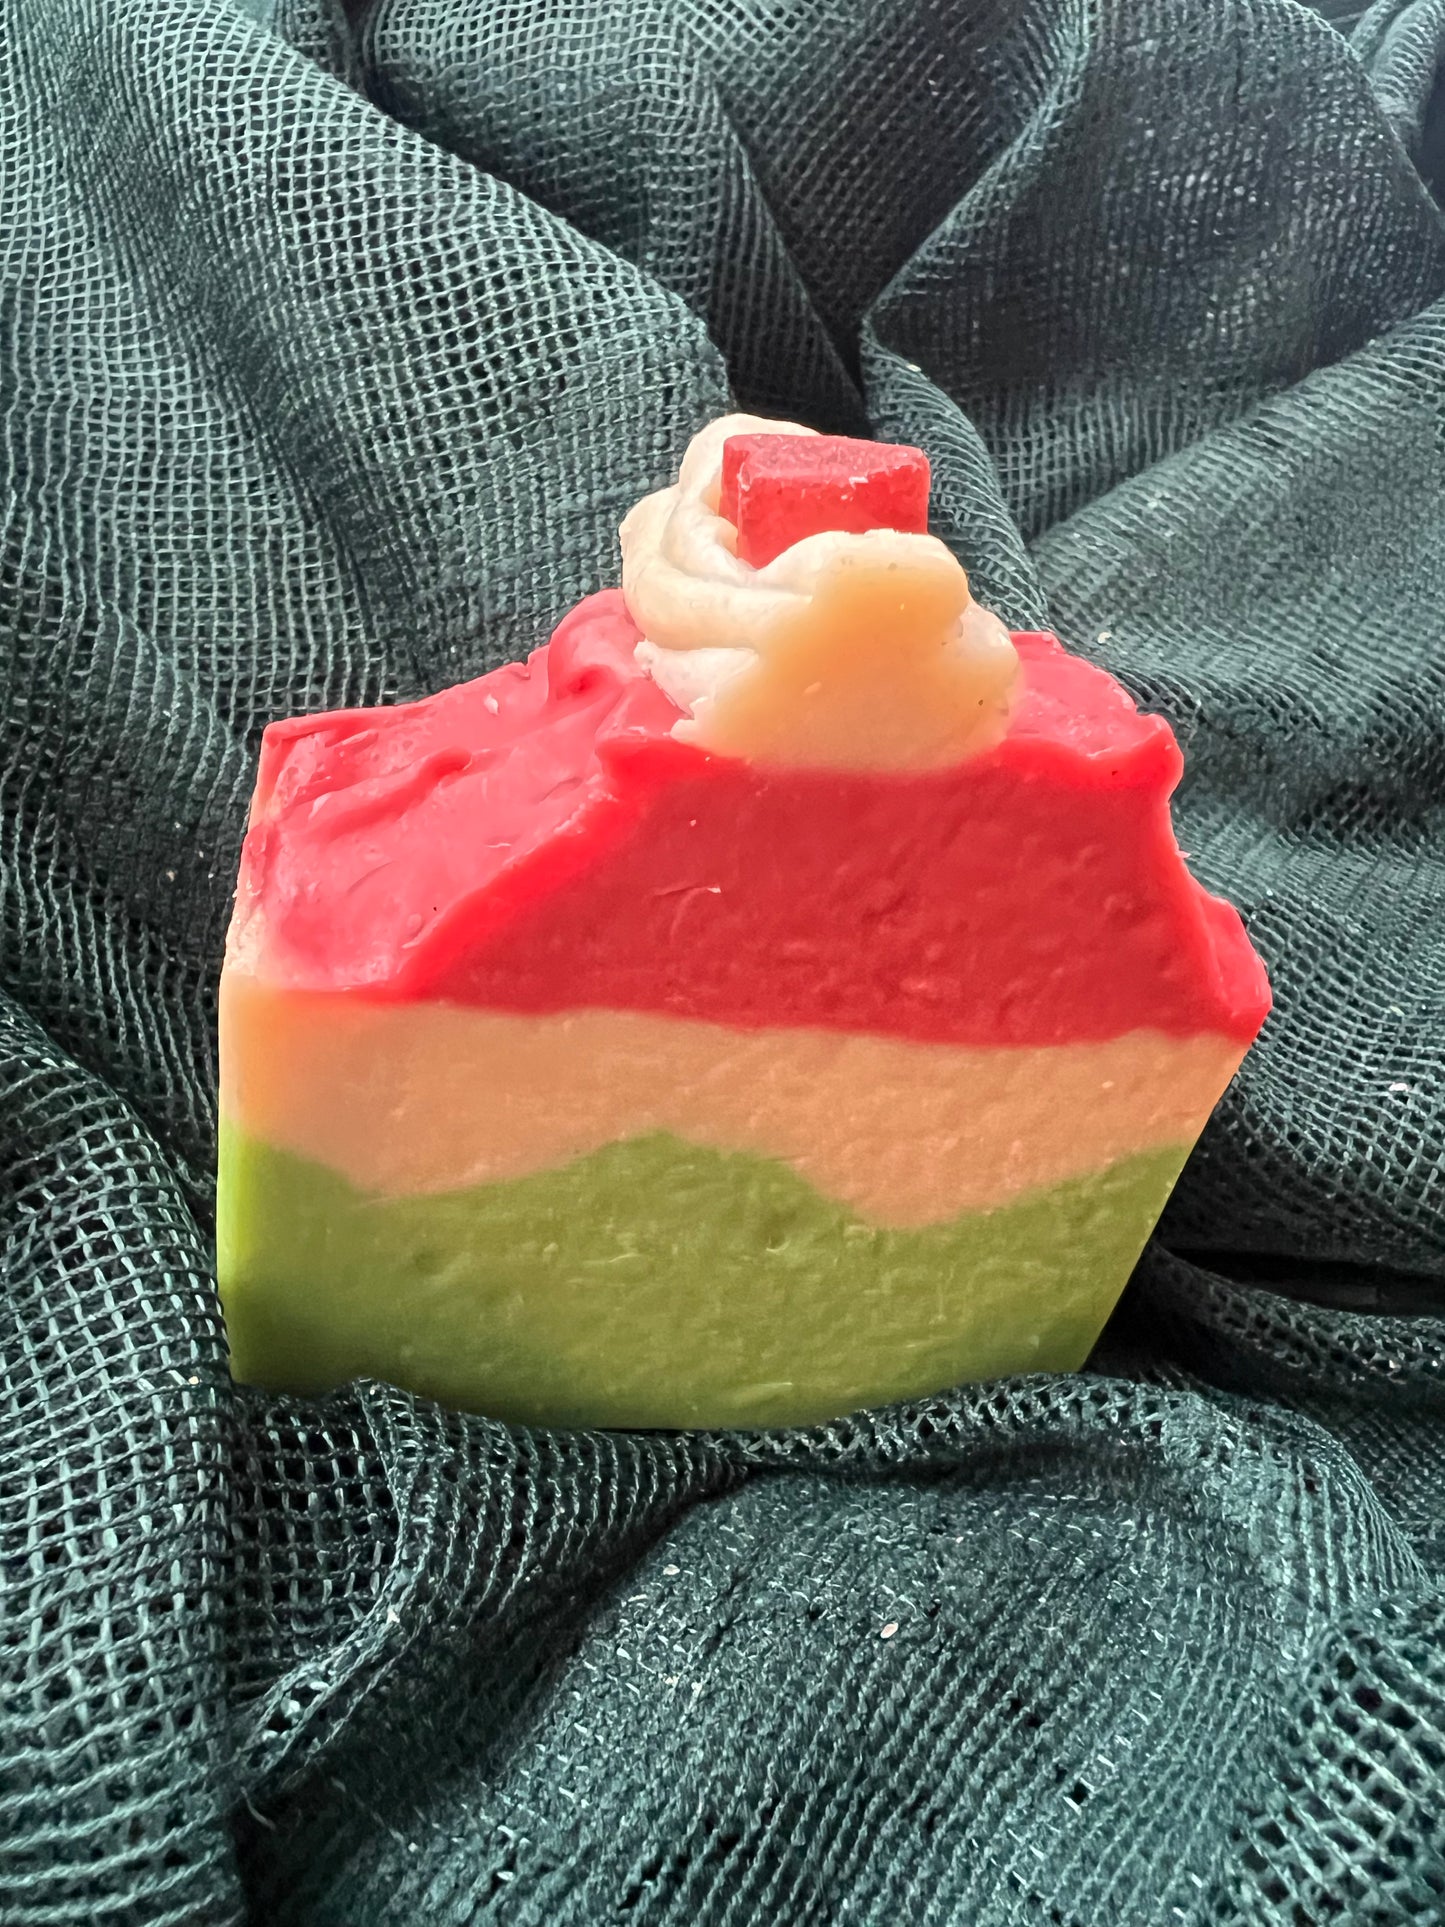 Merry Grinch Mas- Handcrafted Goat Milk Soap